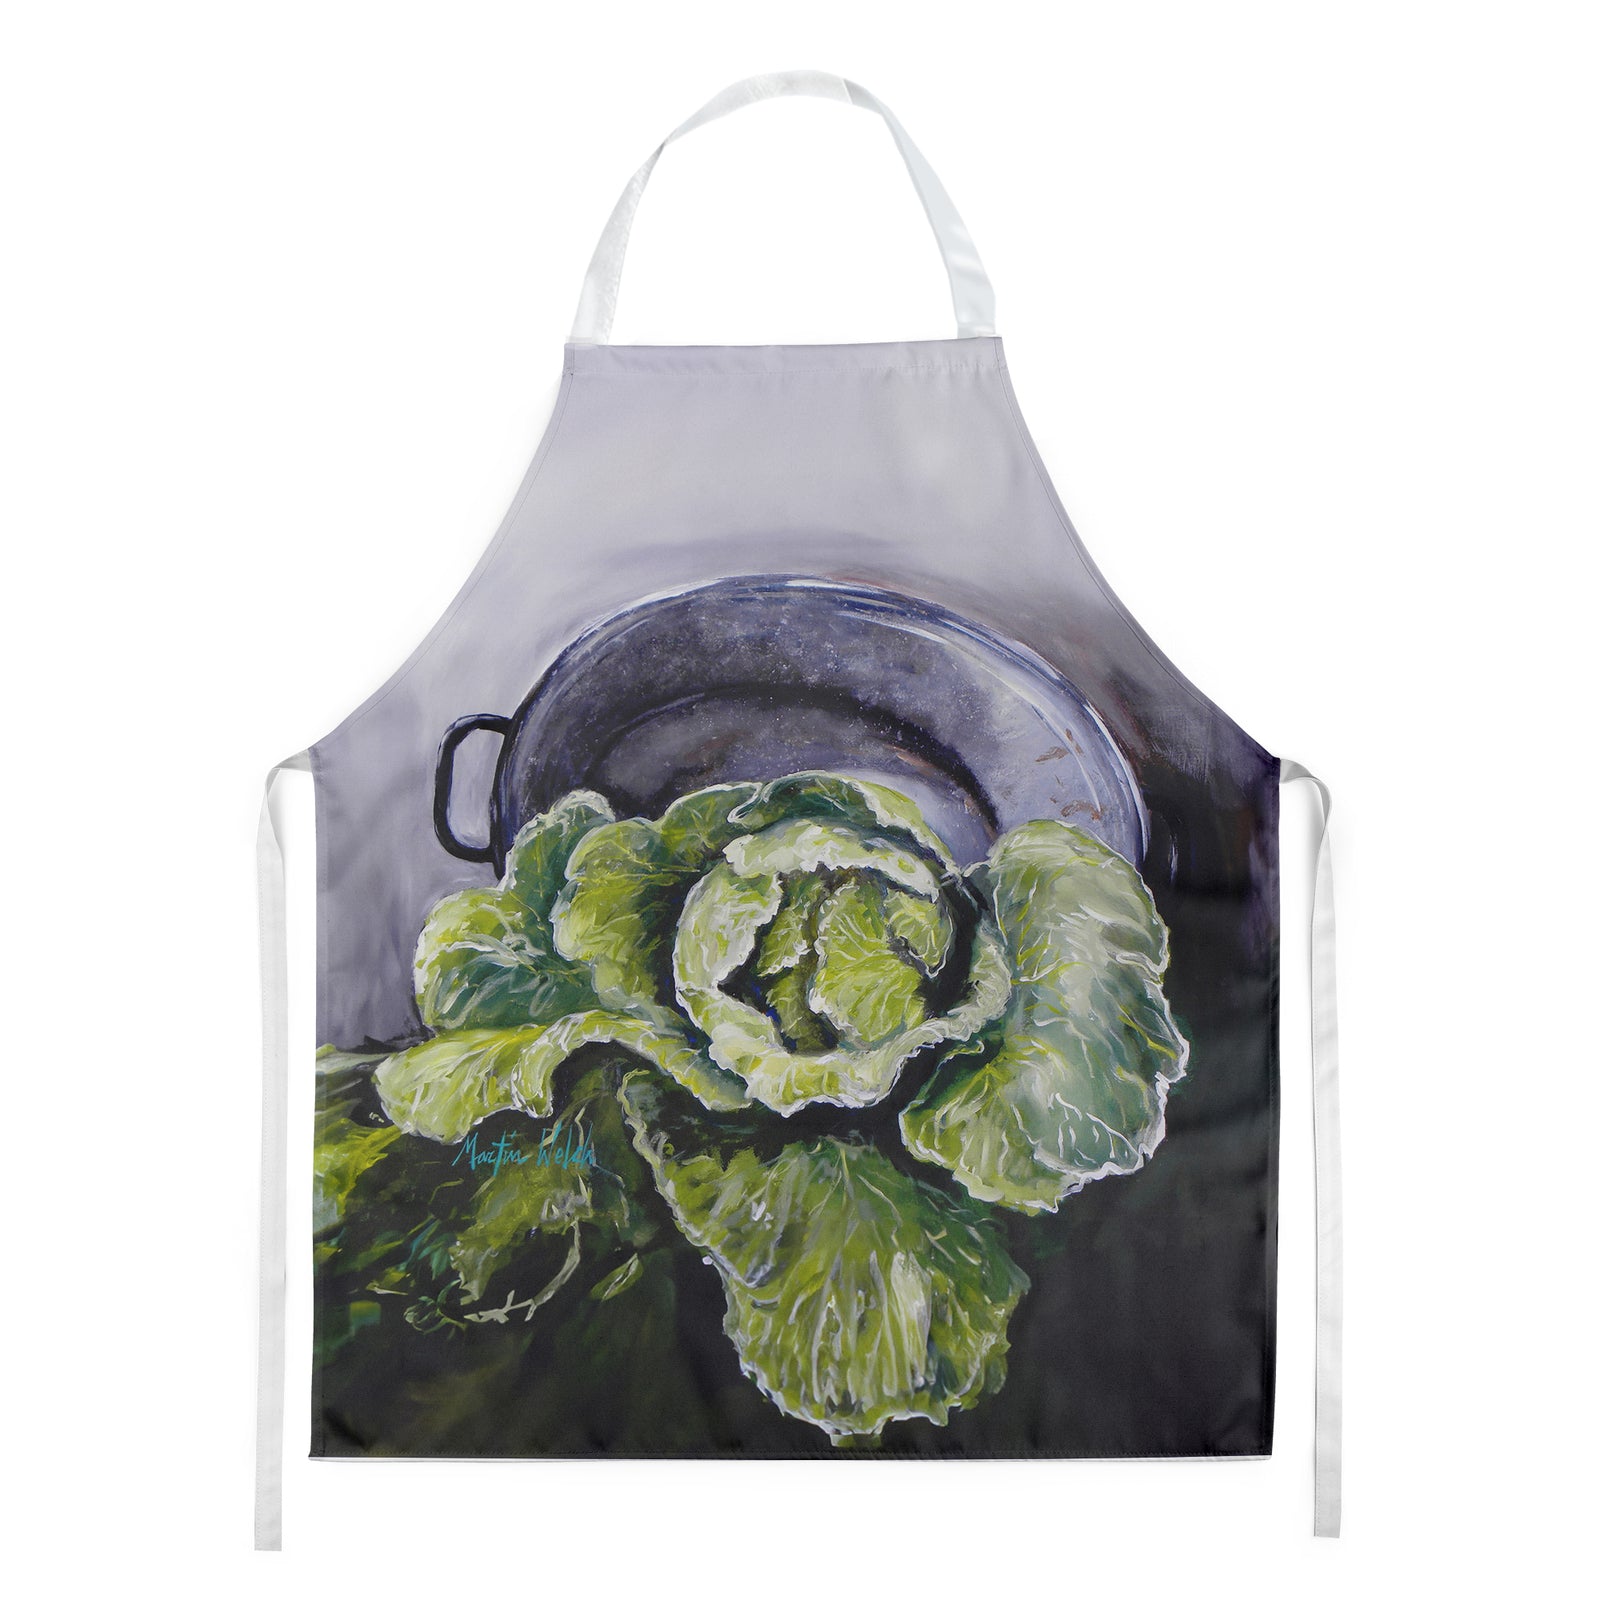 Buy this Home Grown In Plaquemines Parish Cabbage Apron